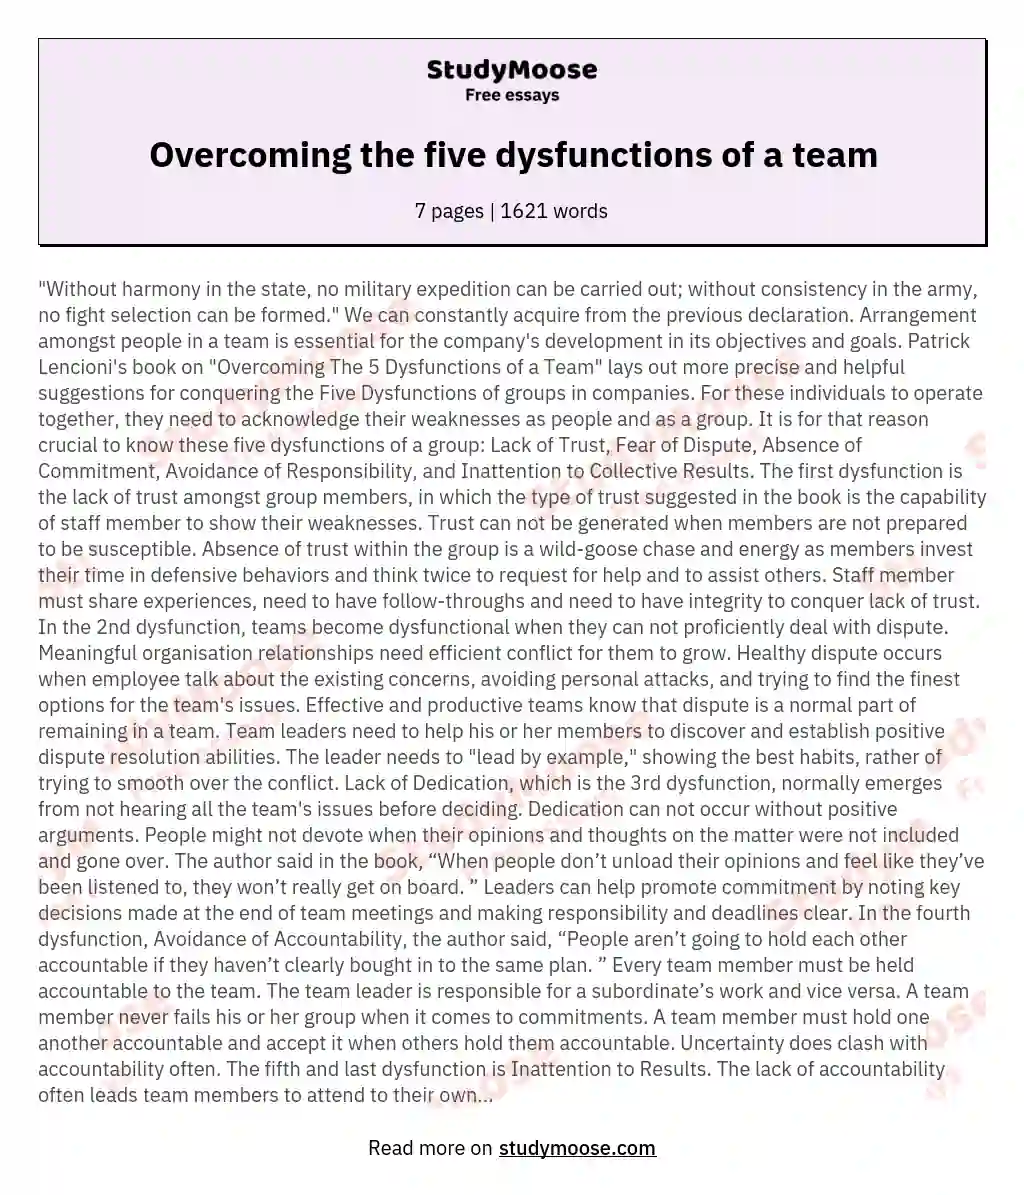 Overcoming the five dysfunctions of a team essay